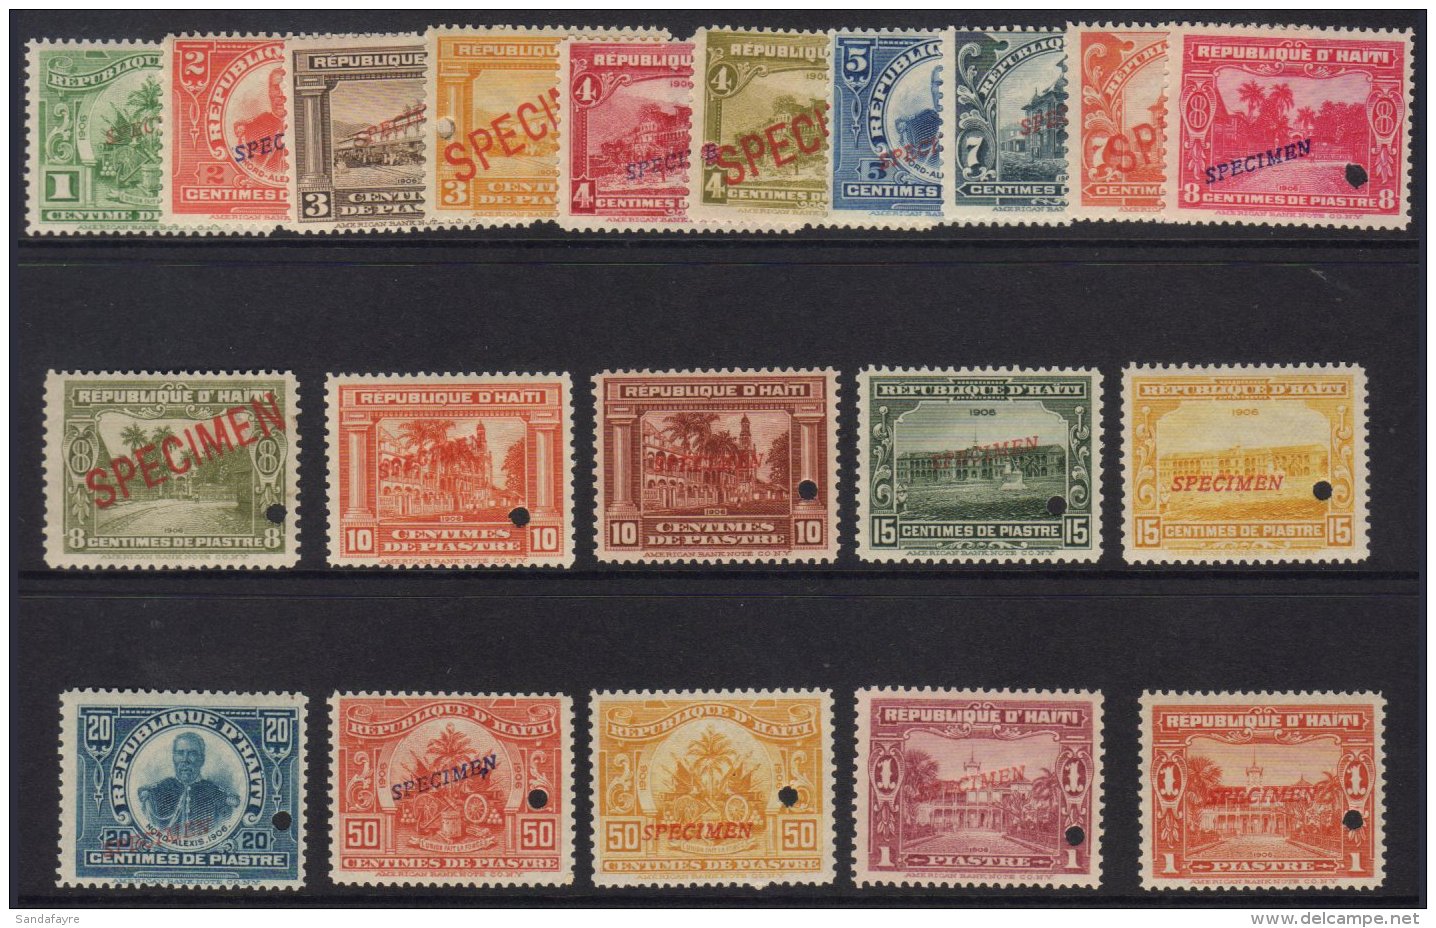 1906-13 Pictorial Complete Set, Scott 125/144, Each With 'SPECIMEN' Overprint And Security Punch Hole, Fresh Never... - Haiti